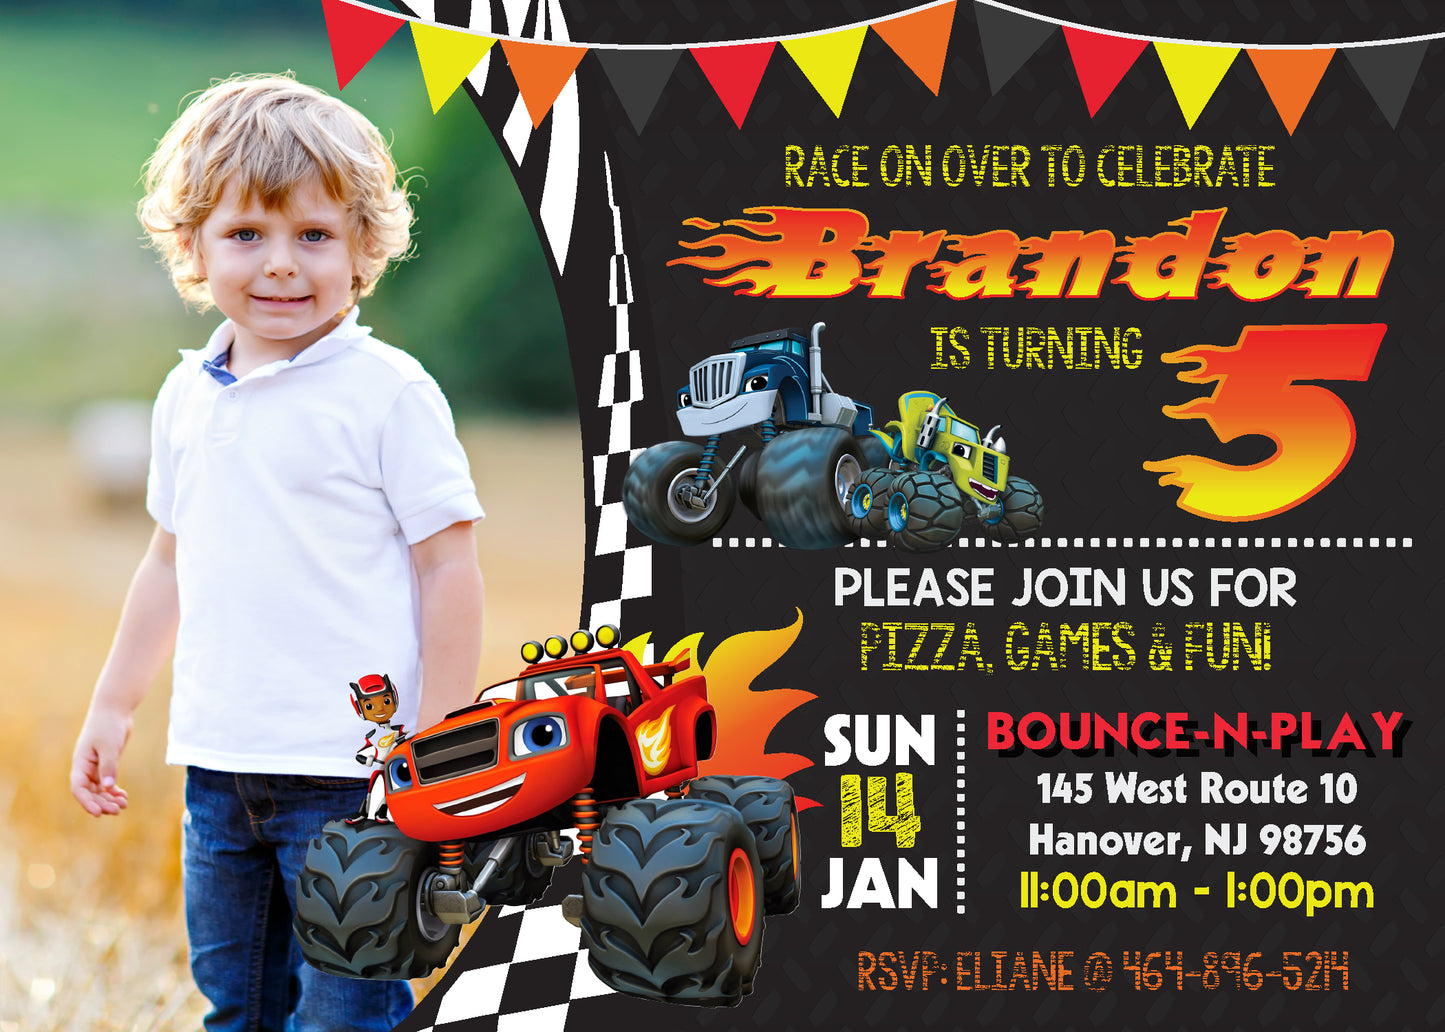 BLAZE and the Monster Machines Birthday Party Invitation with Photo! Printed or Digital!